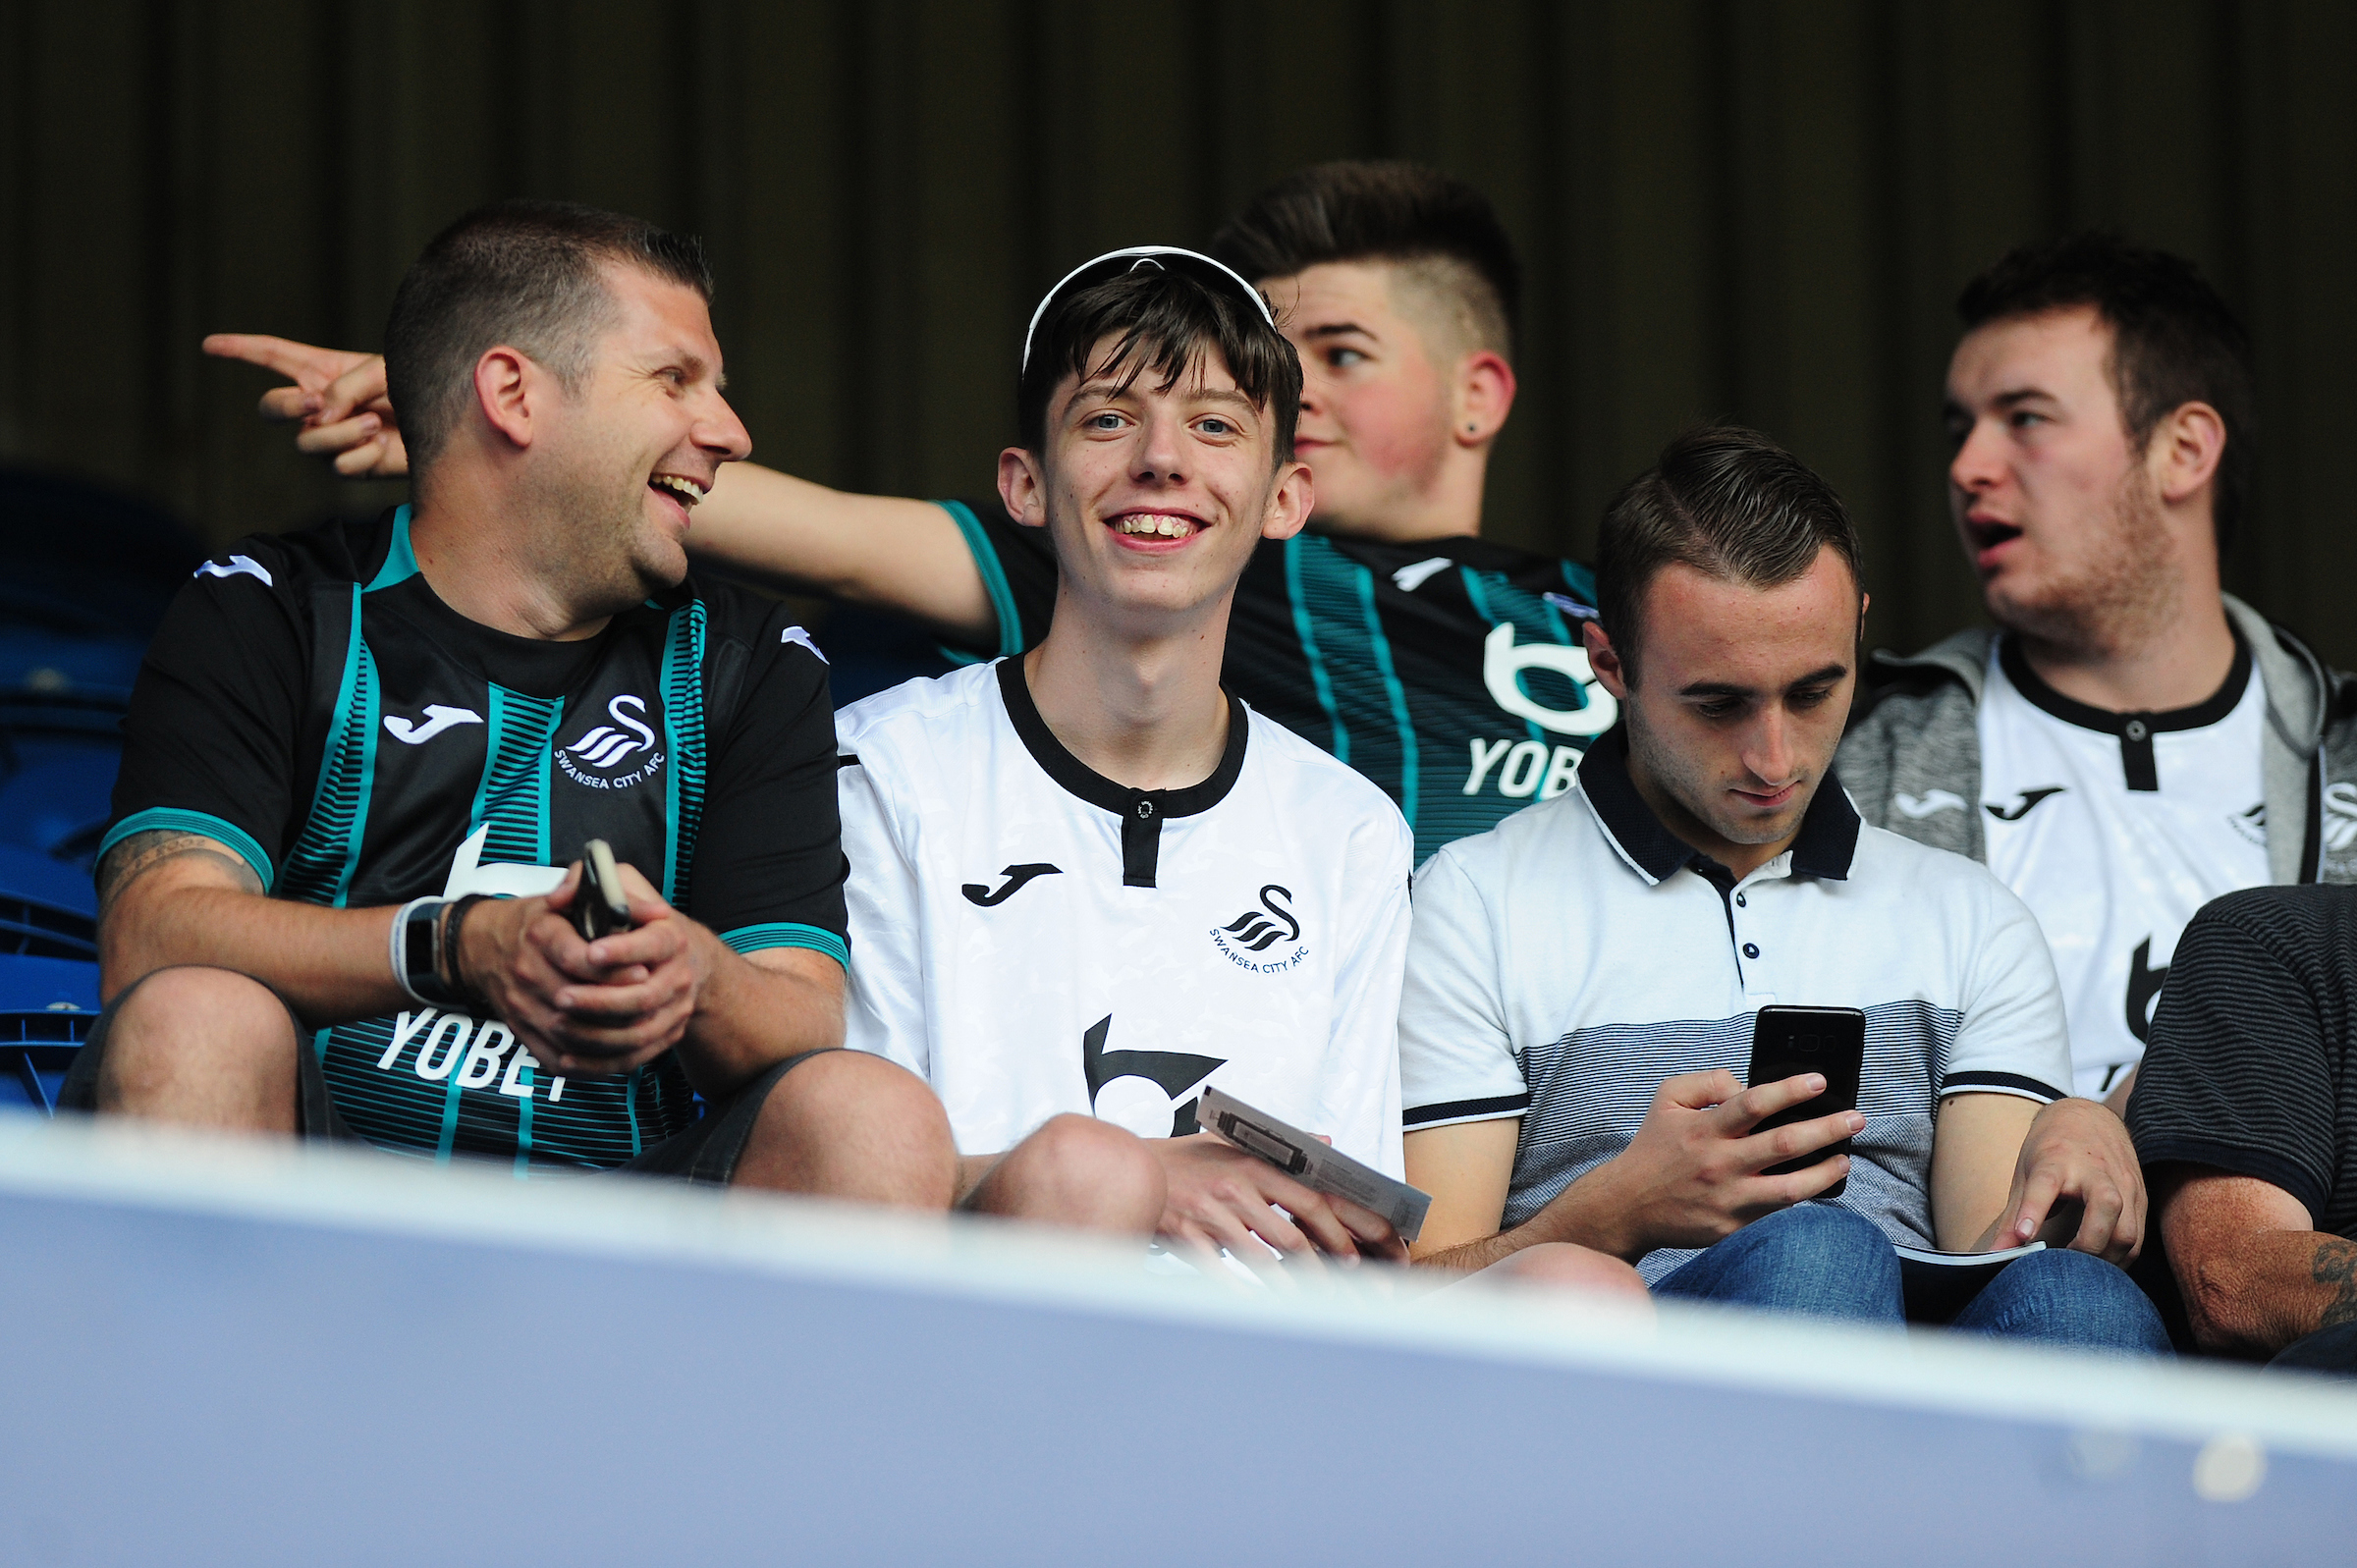 Swansea City supporters